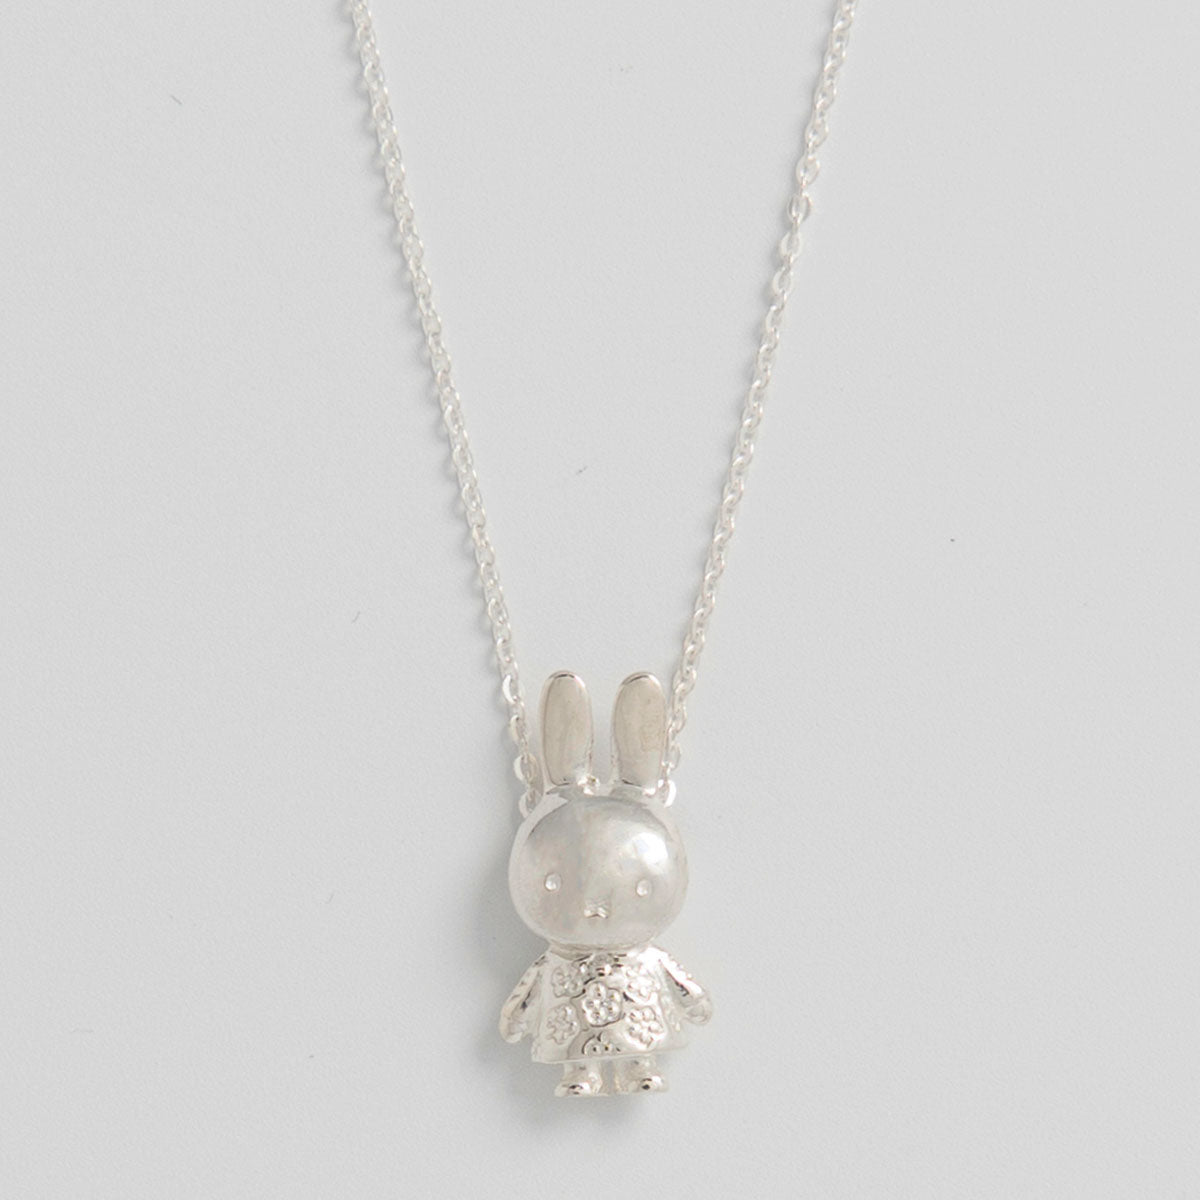 A close-up photograph of a silver Miffy pendant necklace featuring a 3D replica of Miffy's full body charm, hanging from a delicate silver chain